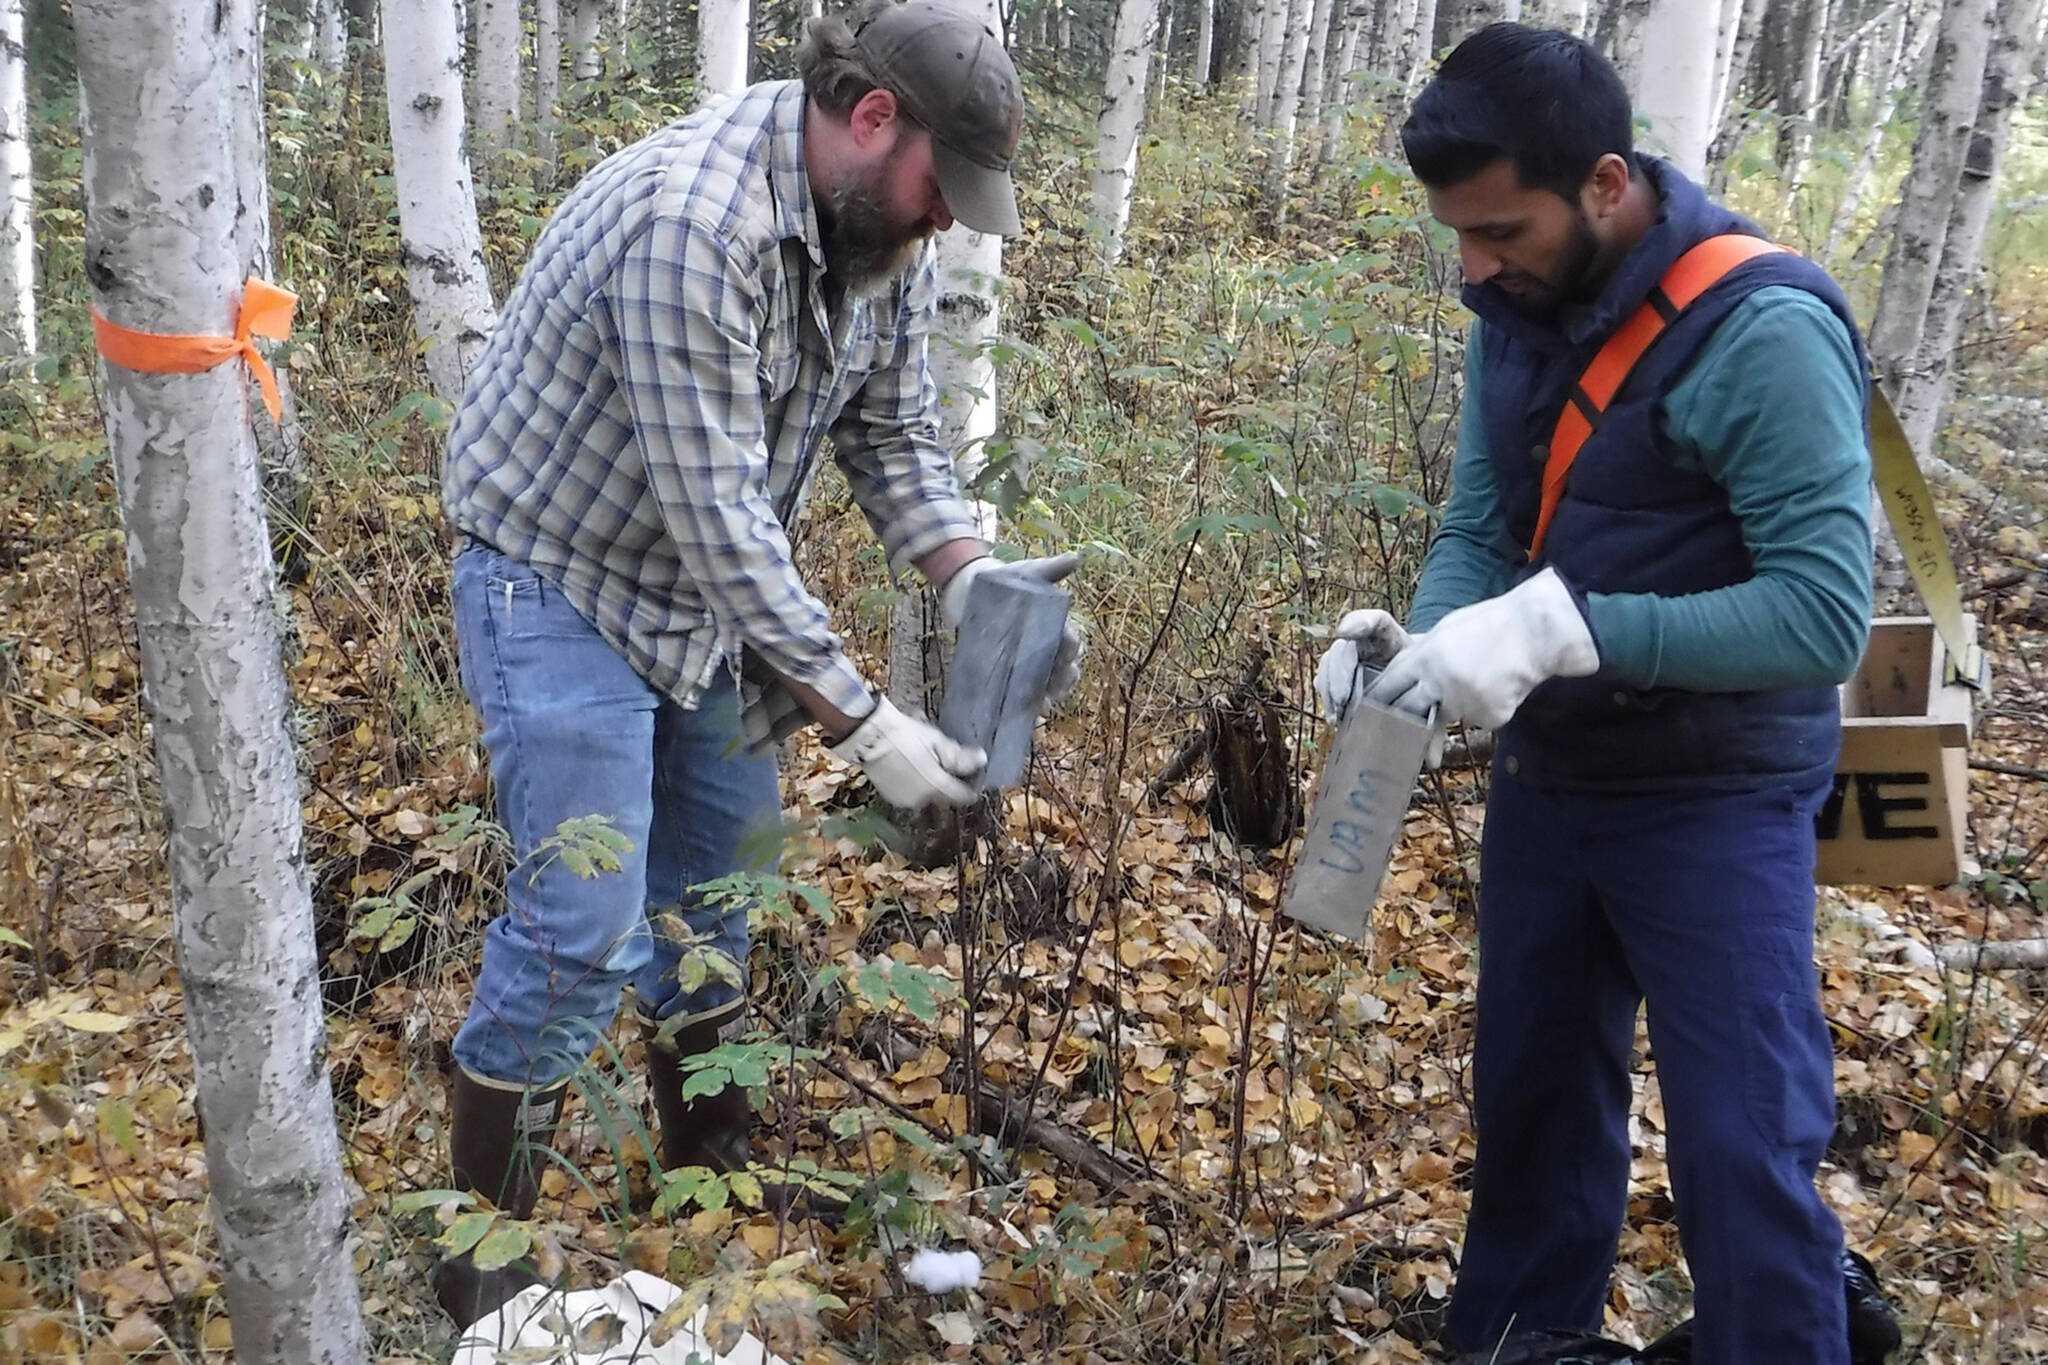 Jeff Doty and Faisai Minhaj check traps baited with oats and peanut butter for voles and squirrels in Interior Alaska. (Courtesy Photo / Ned Rozell)